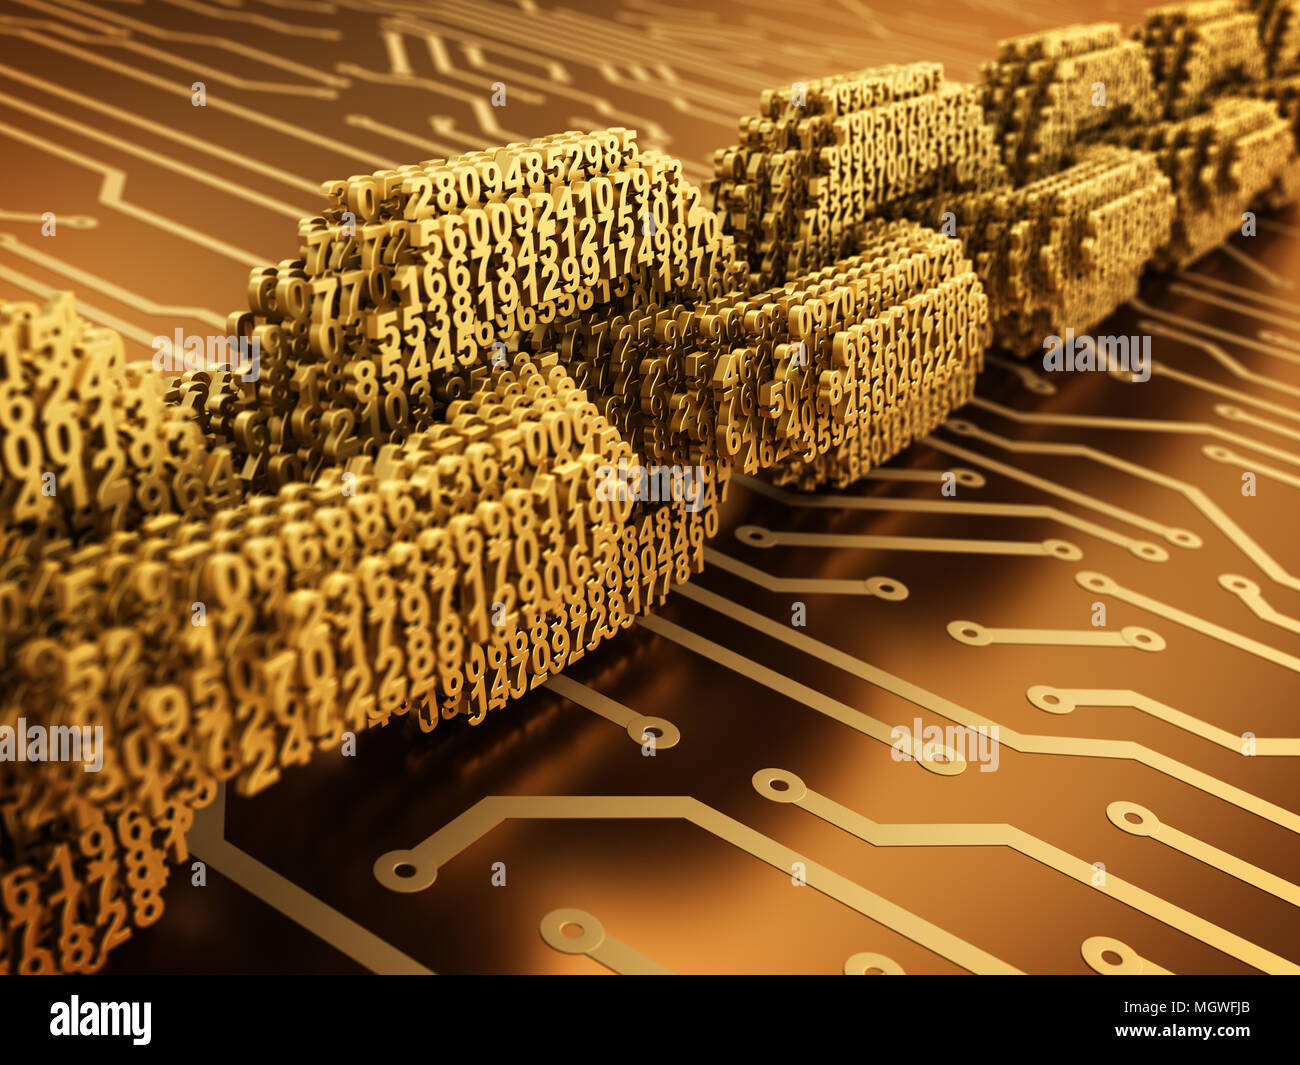 Concept Of Blockchain. Gold Digital Chain Of Interconnected 3D Numbers On Gold Printed Circuit Board. 3D Illustration. Stock Photo